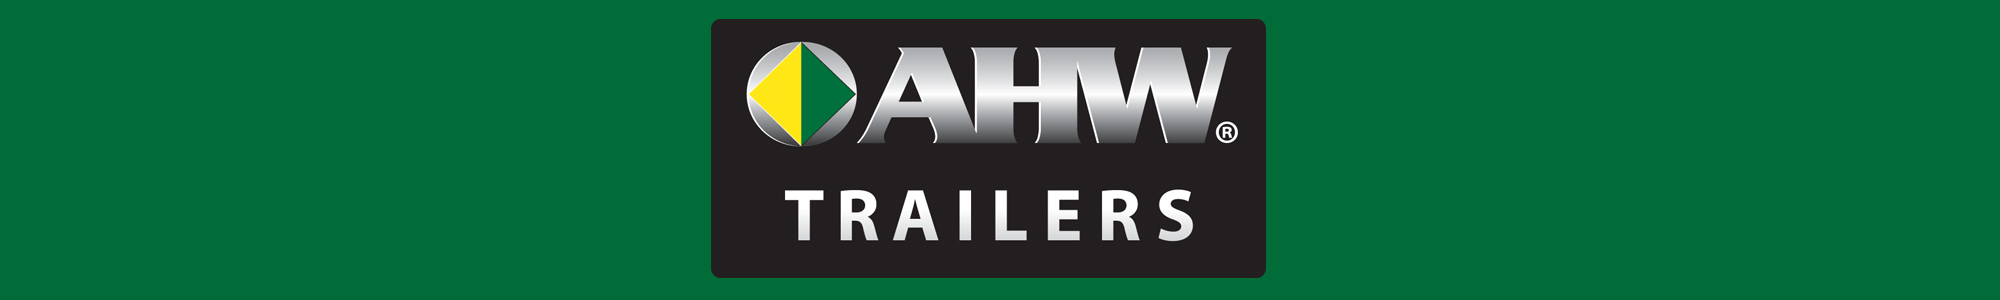 AHW Trailers